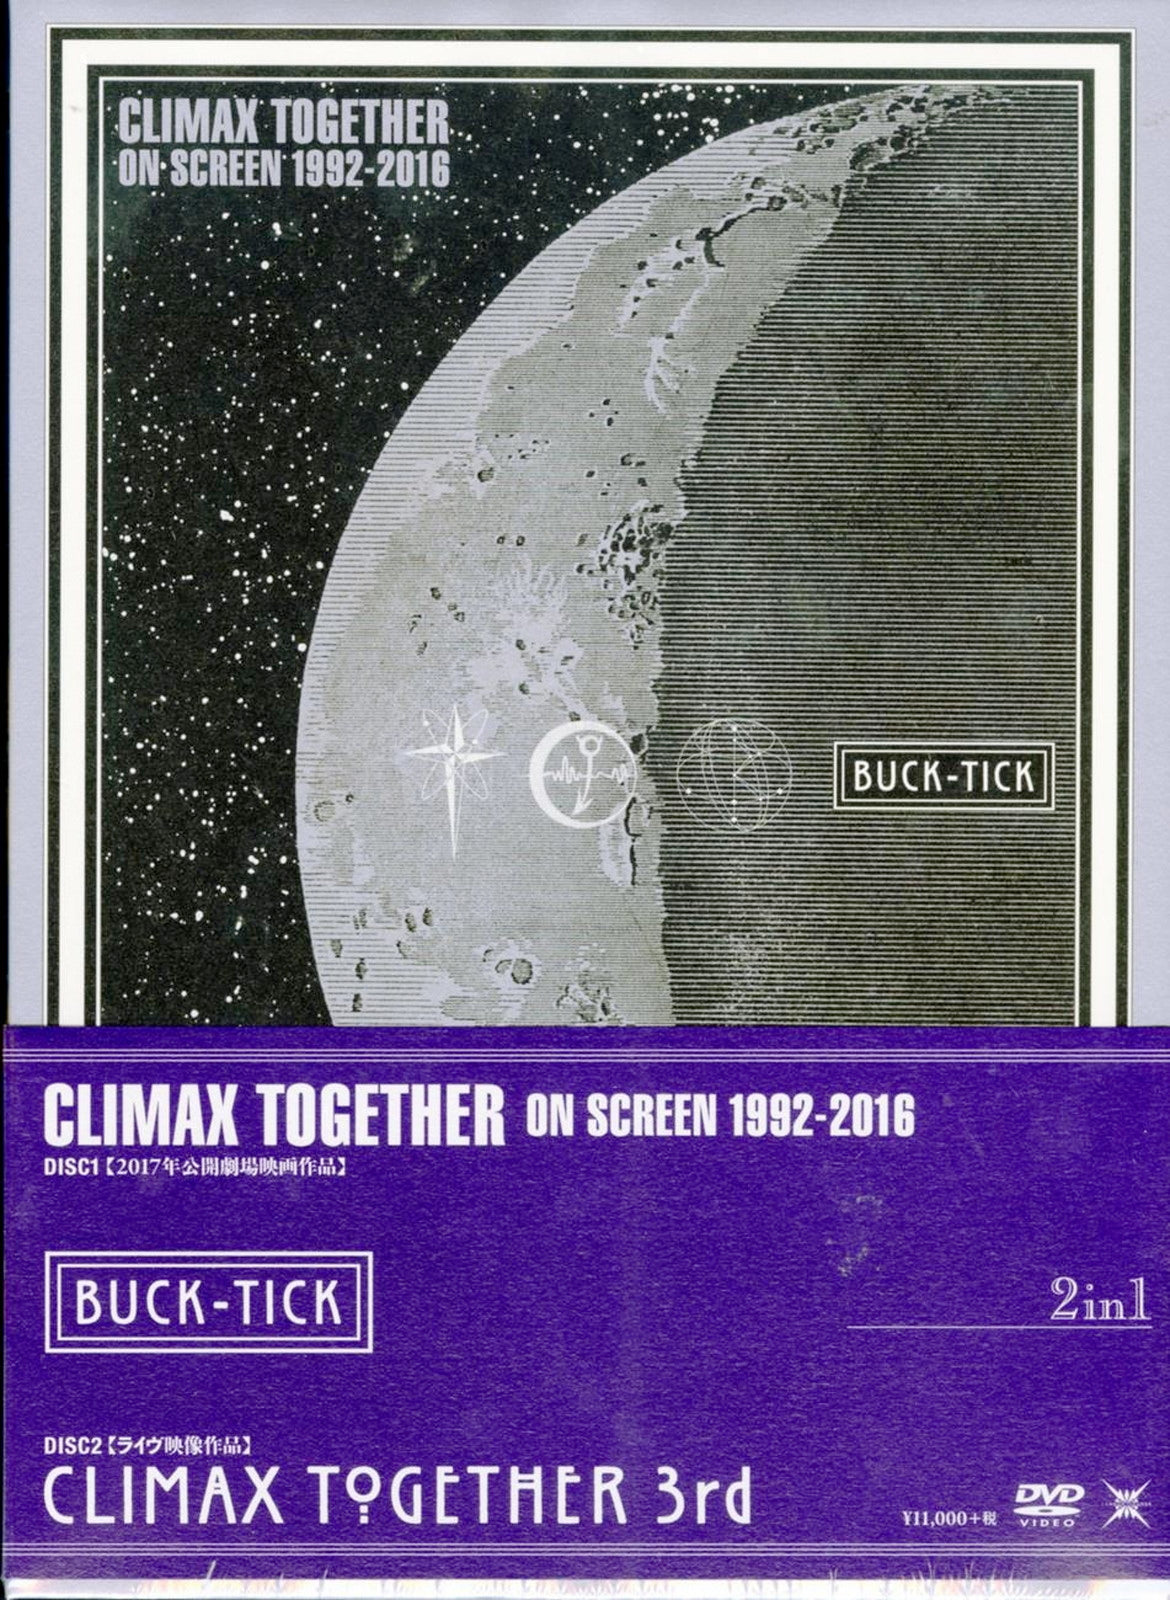 Buck-Tick - Climax Together On Screen 1992-2016/Climax Together 3Rd - – CDs  Vinyl Japan Store